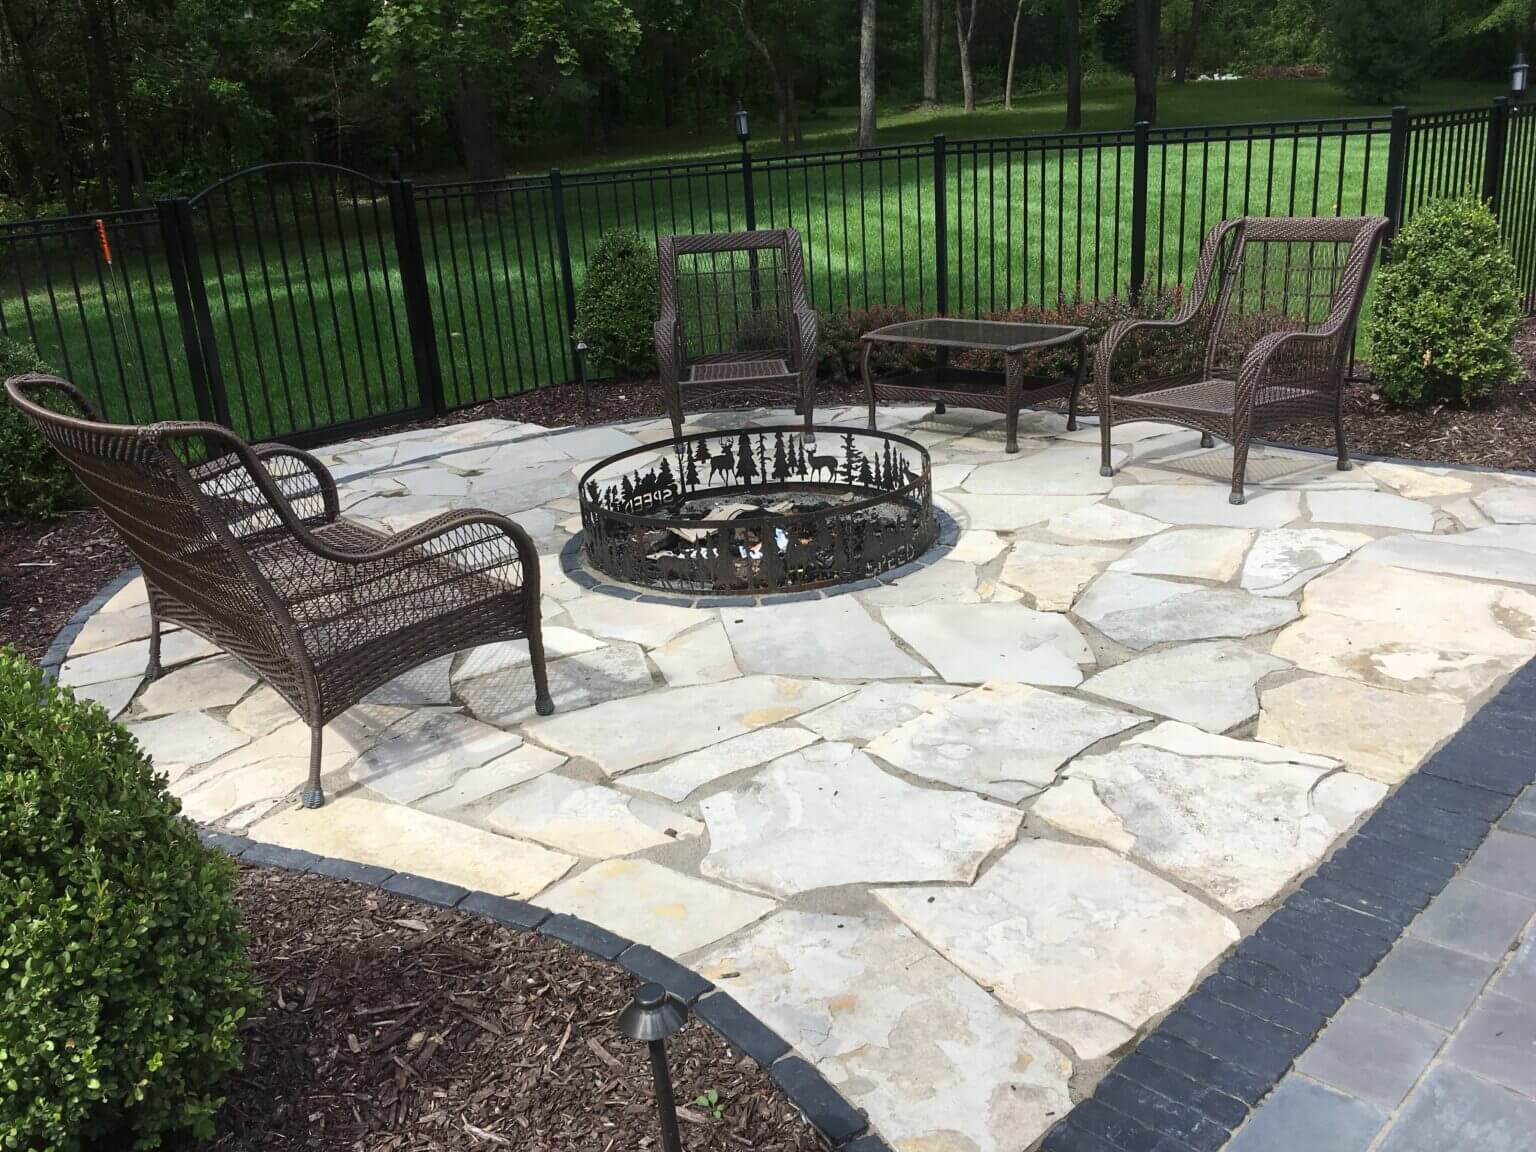 Outdoor fireplace se michigan Hardscape oakland twp mi Landscape design se michigan Outdoor Fire Features Fire Pit Designs Fire Feature Ideas Gas Fire Pits Outdoor Fireplaces